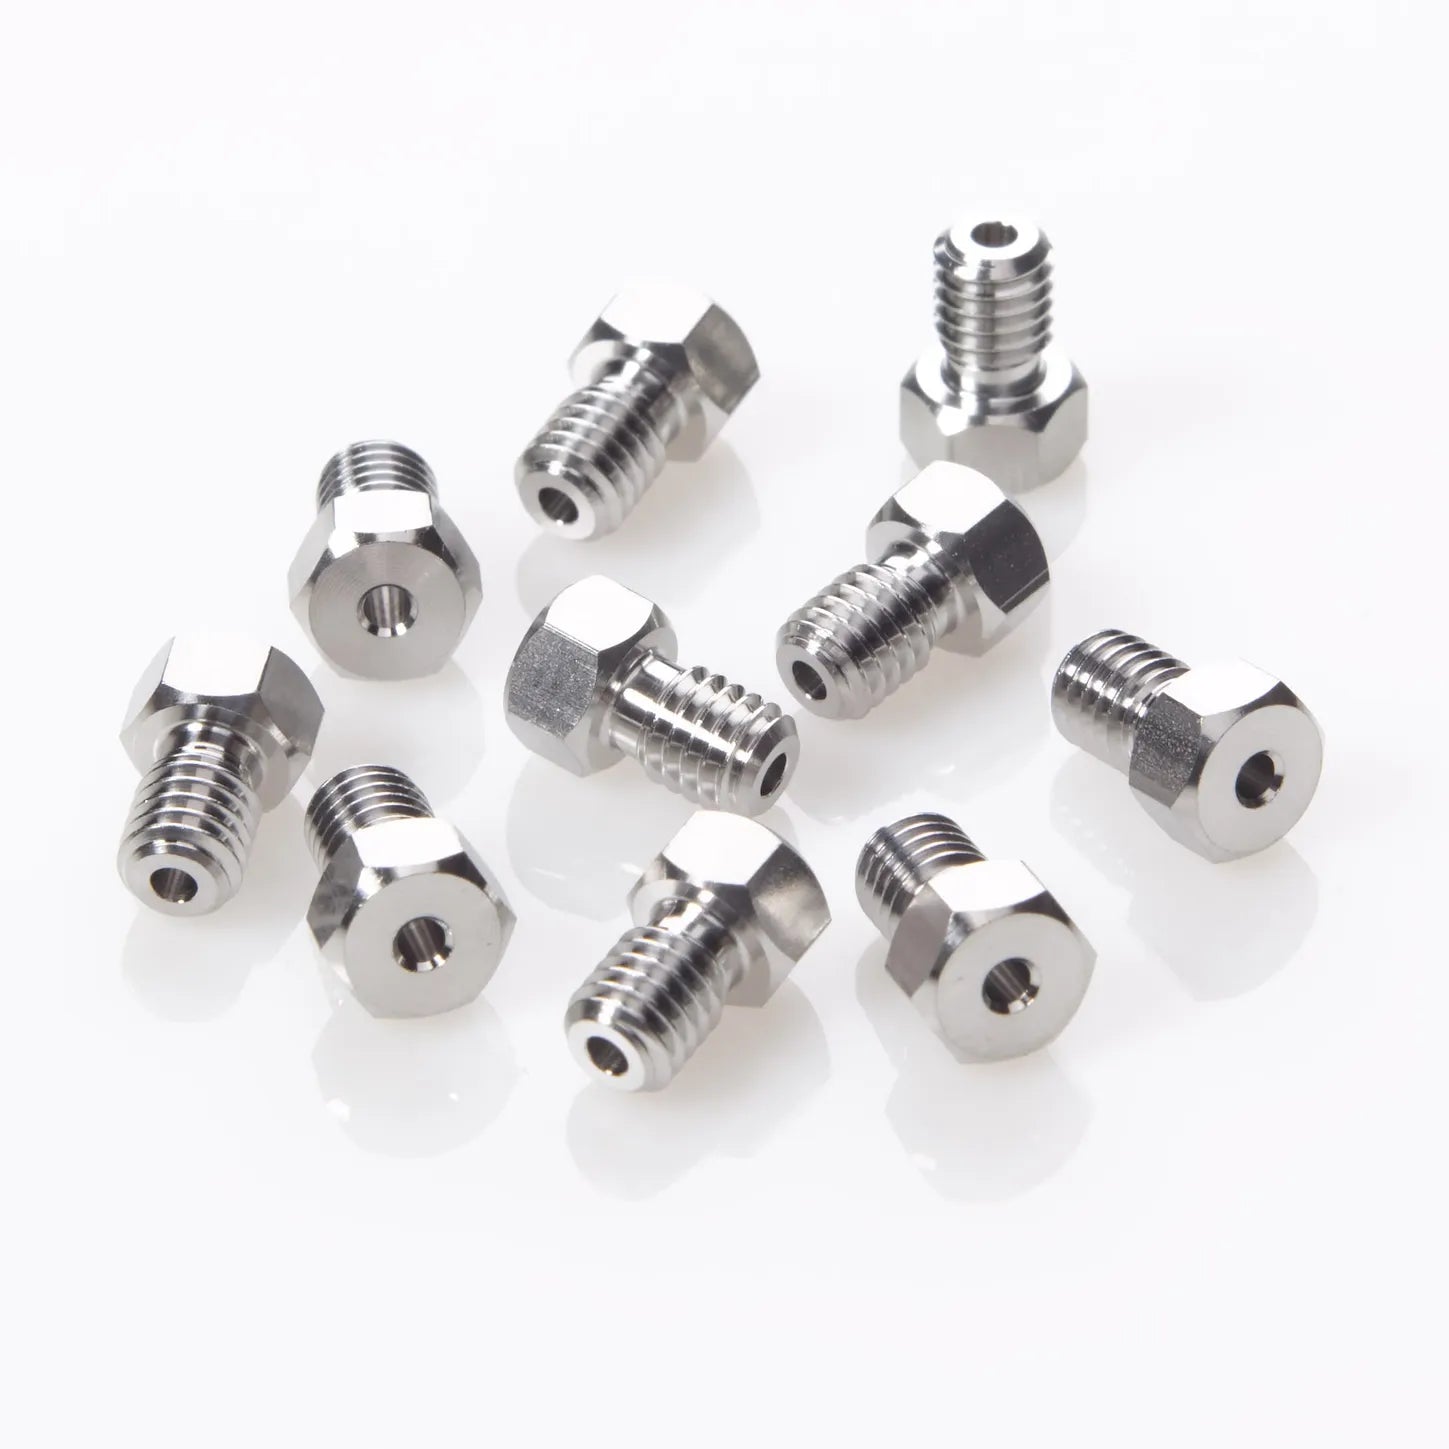 Nut 10-32 Stainless Steel Male for 1/16" OD Tubing, 10/pk